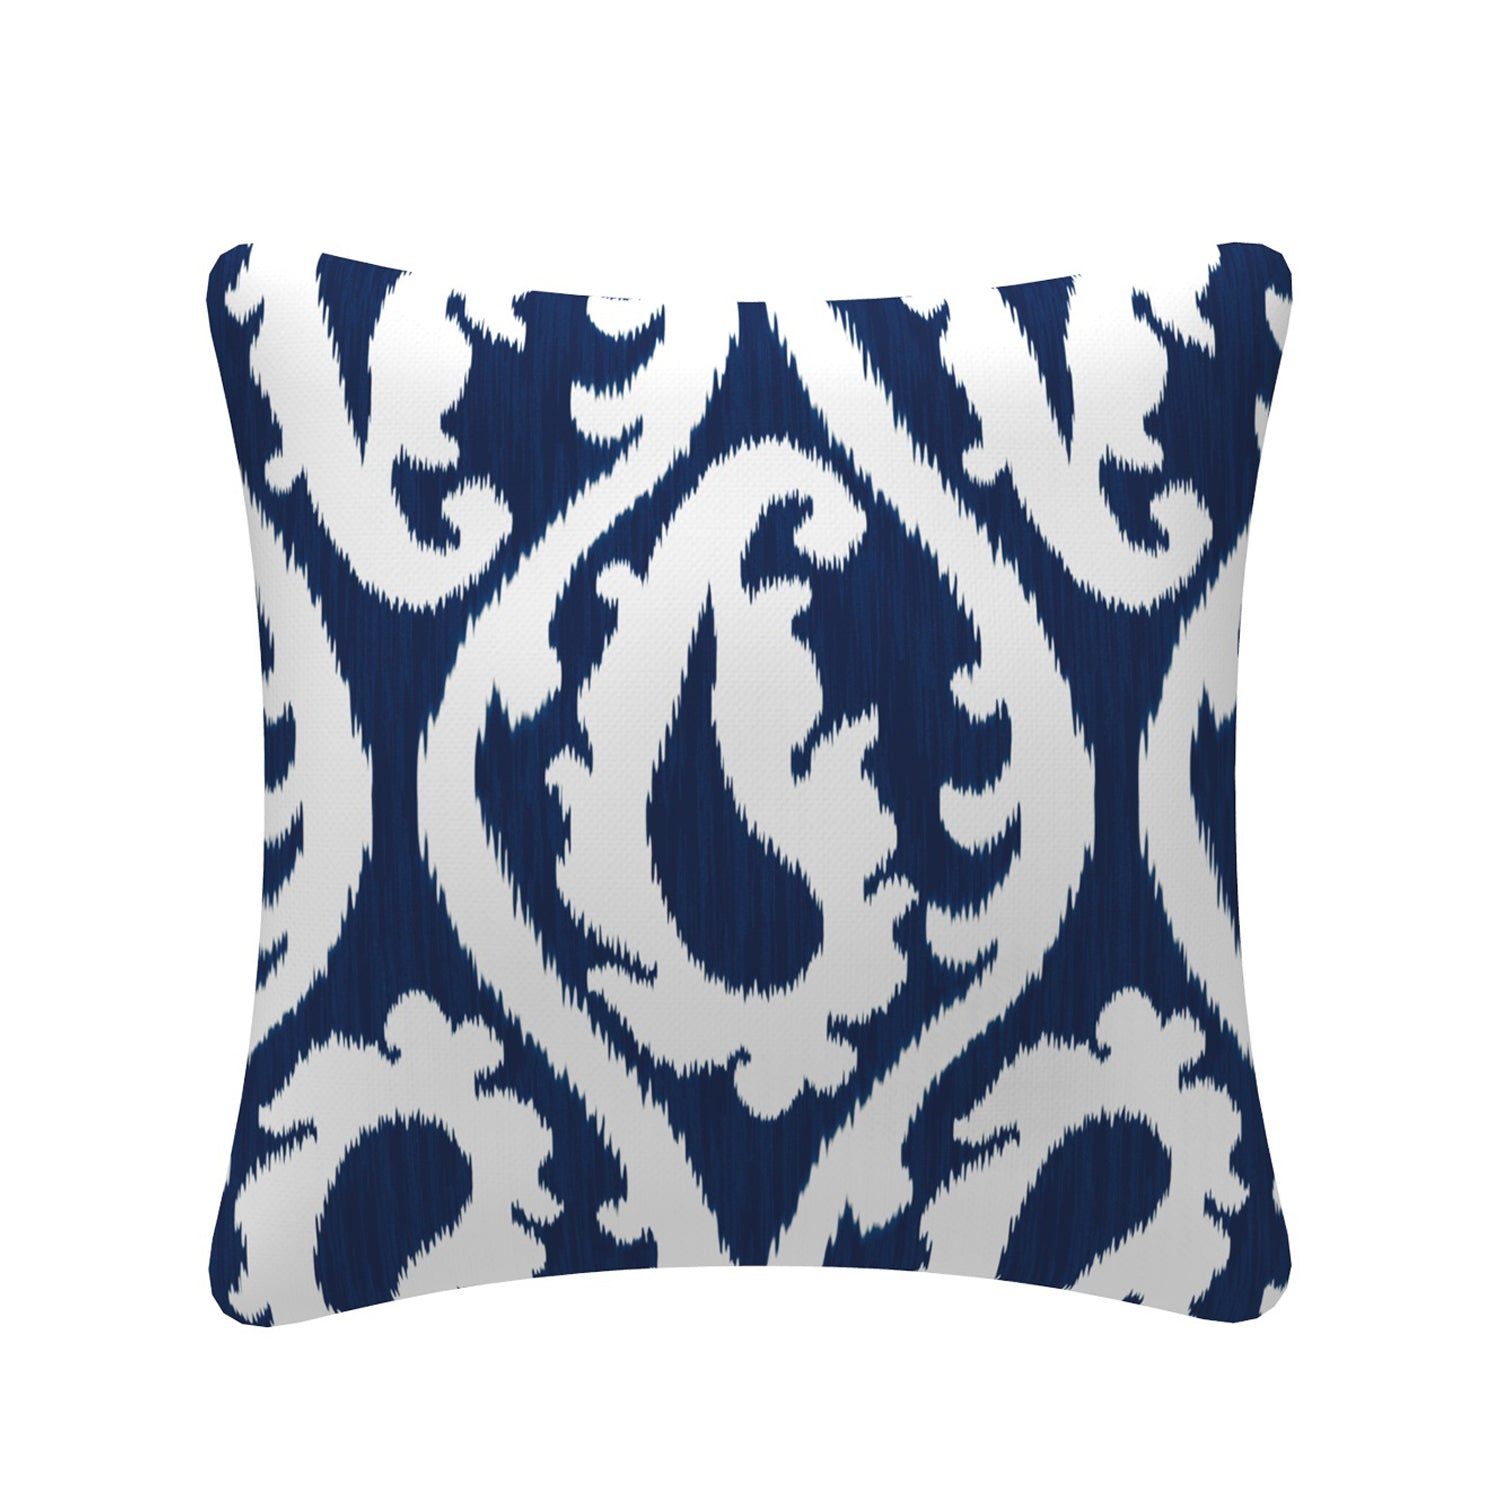 Outdoor Pillows with Insert Navy Paisley Patio Accent Throw Pillows 18x18 inch Square Decorative Pillows